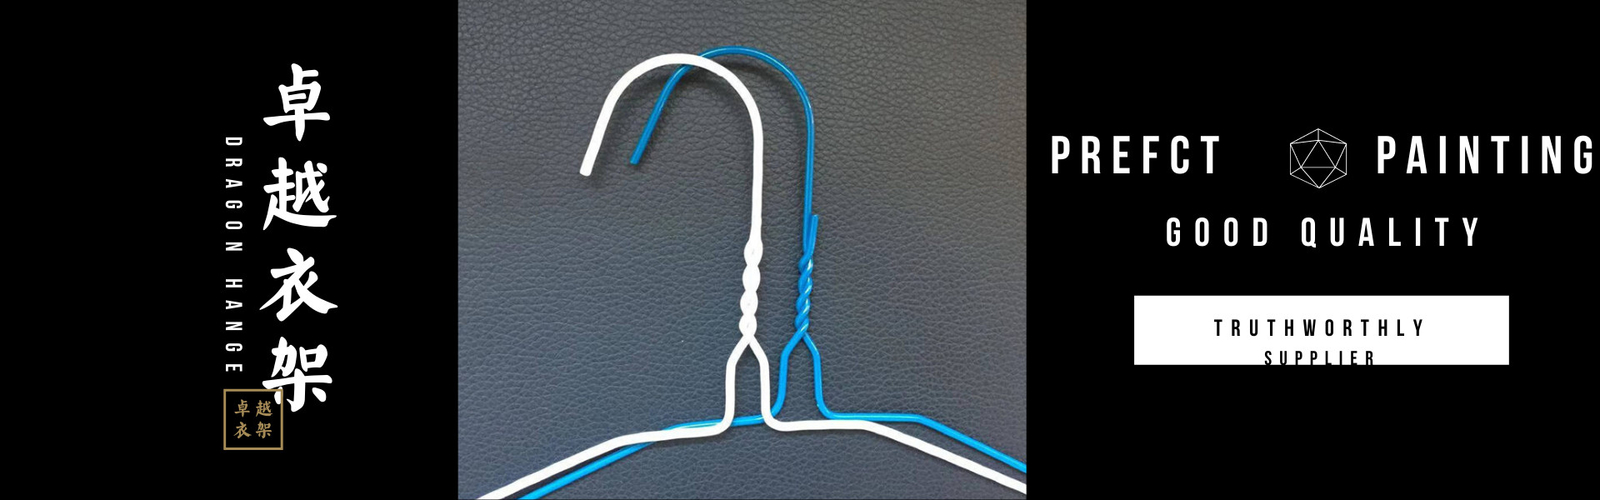 Laundry Wire Hanger